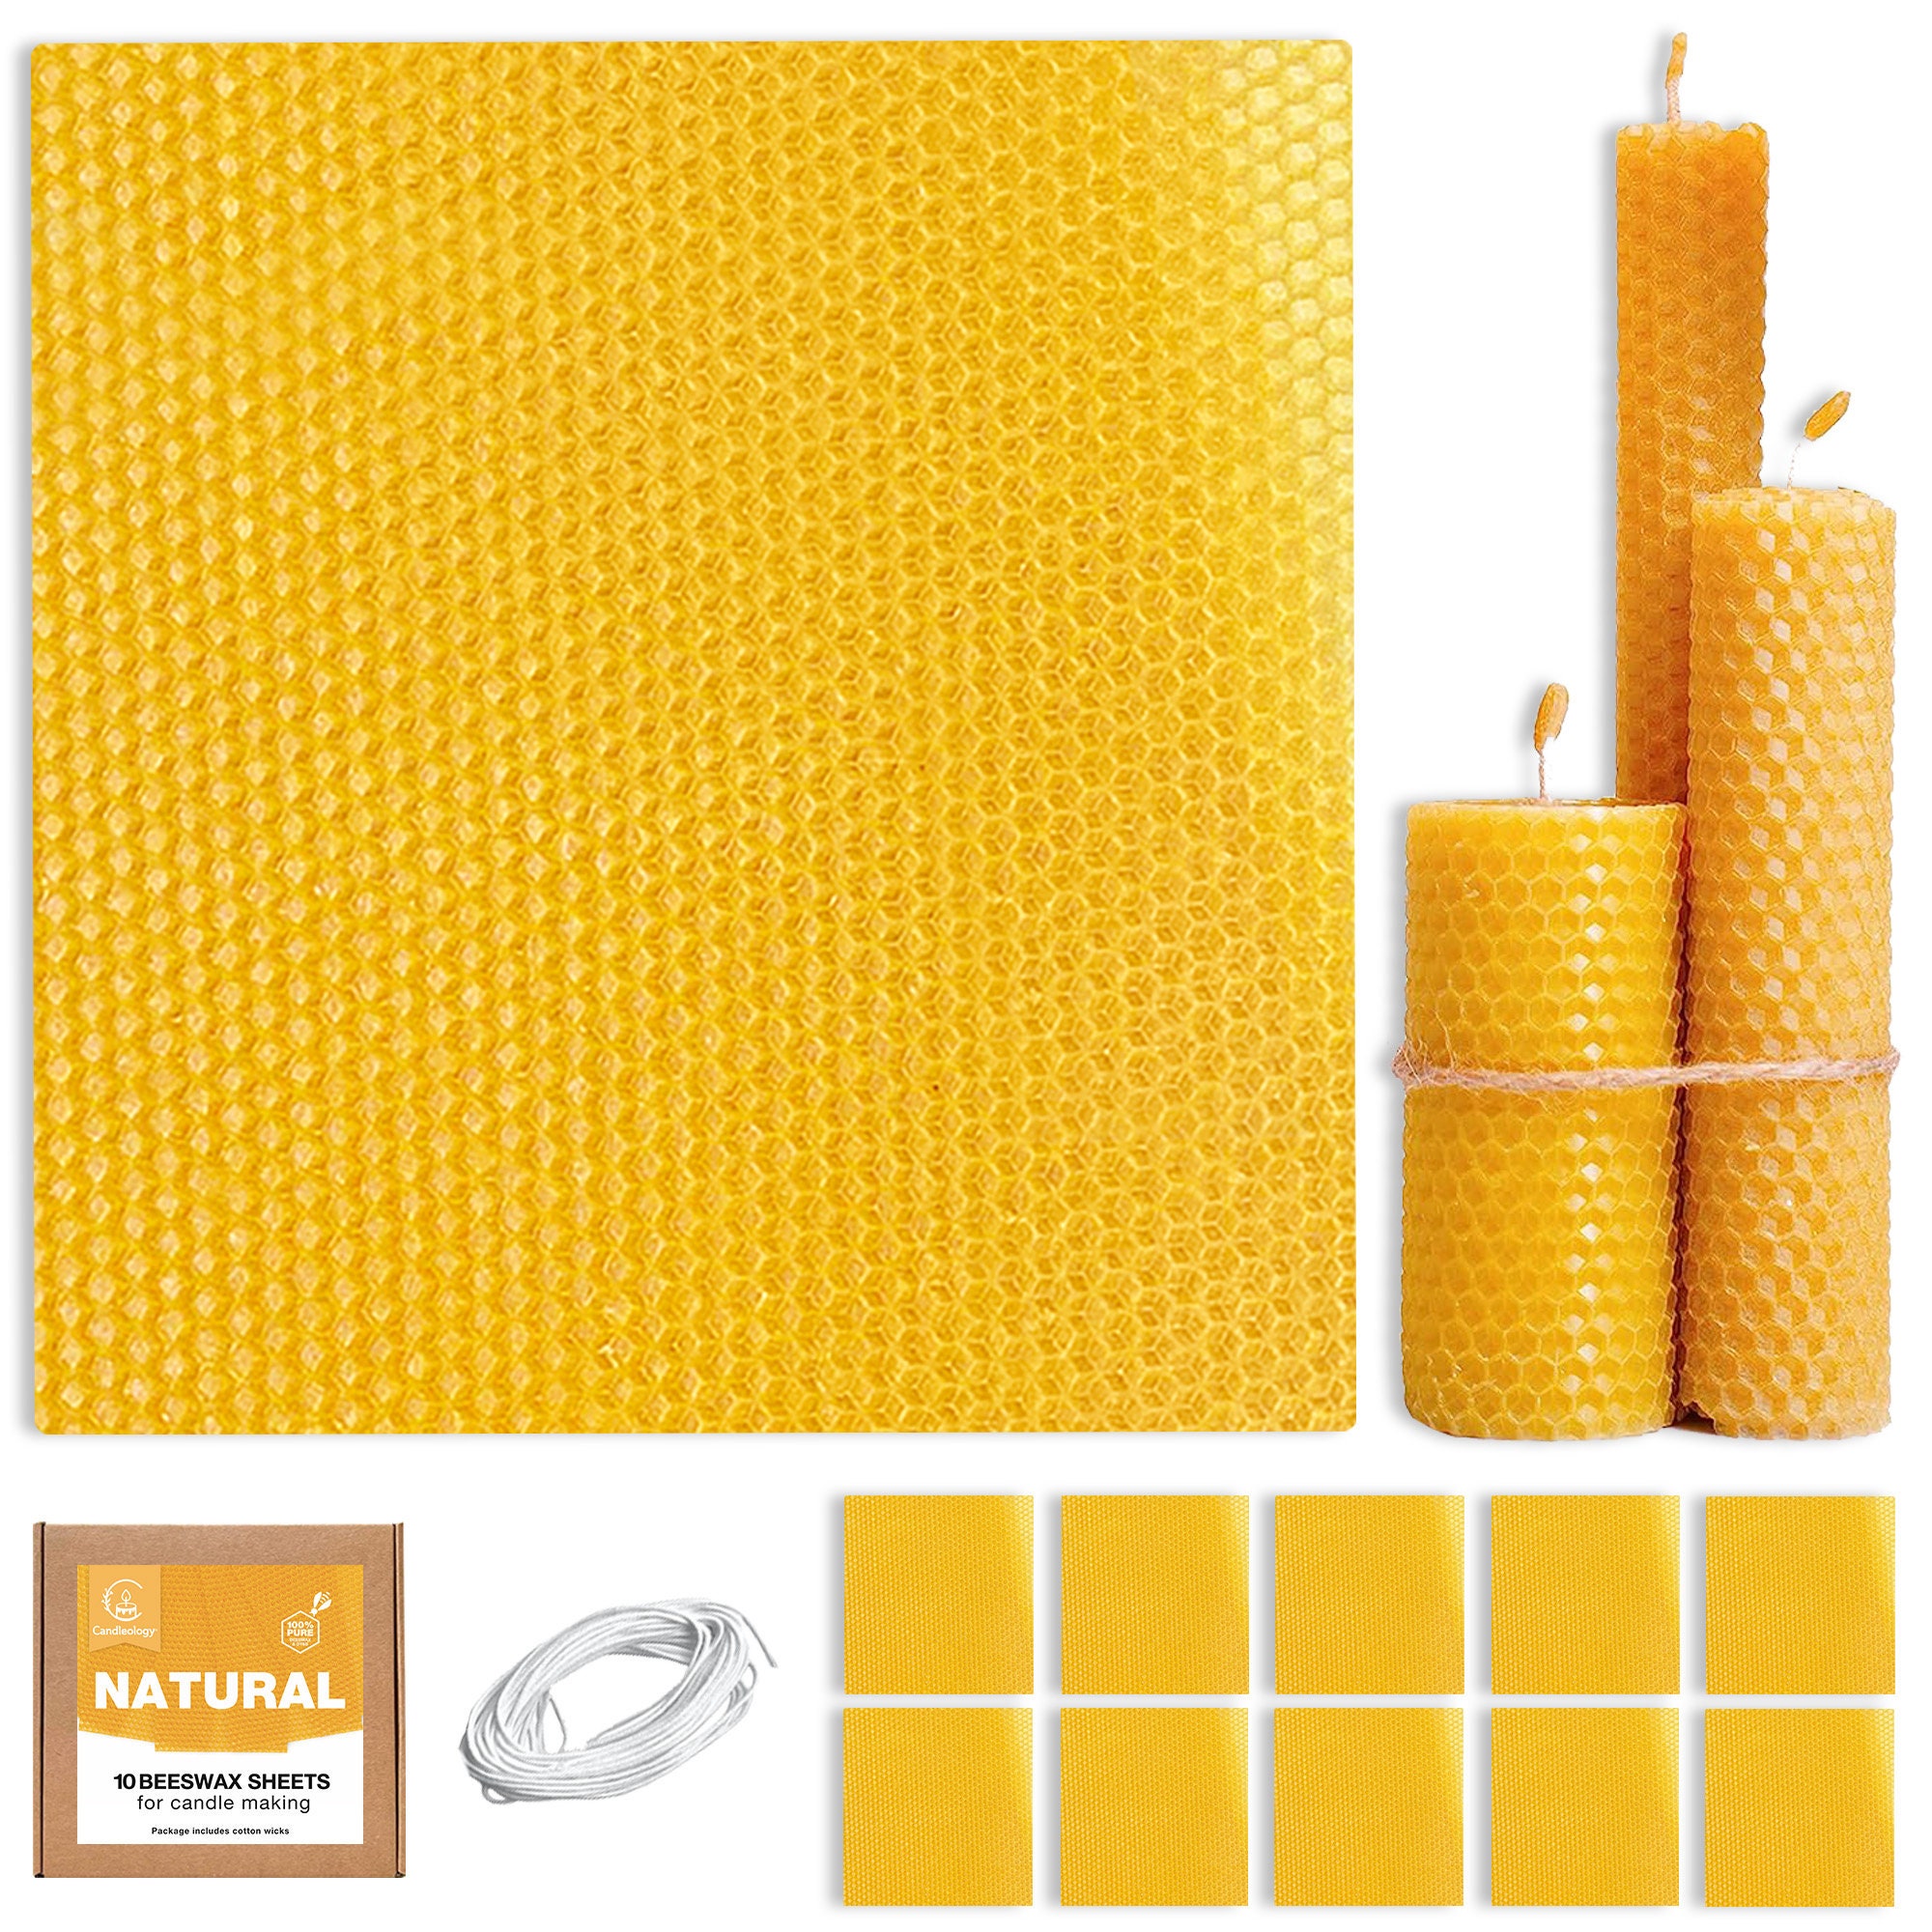 Natural Beeswax Sheets for Candle Making DIY Beeswax Candle